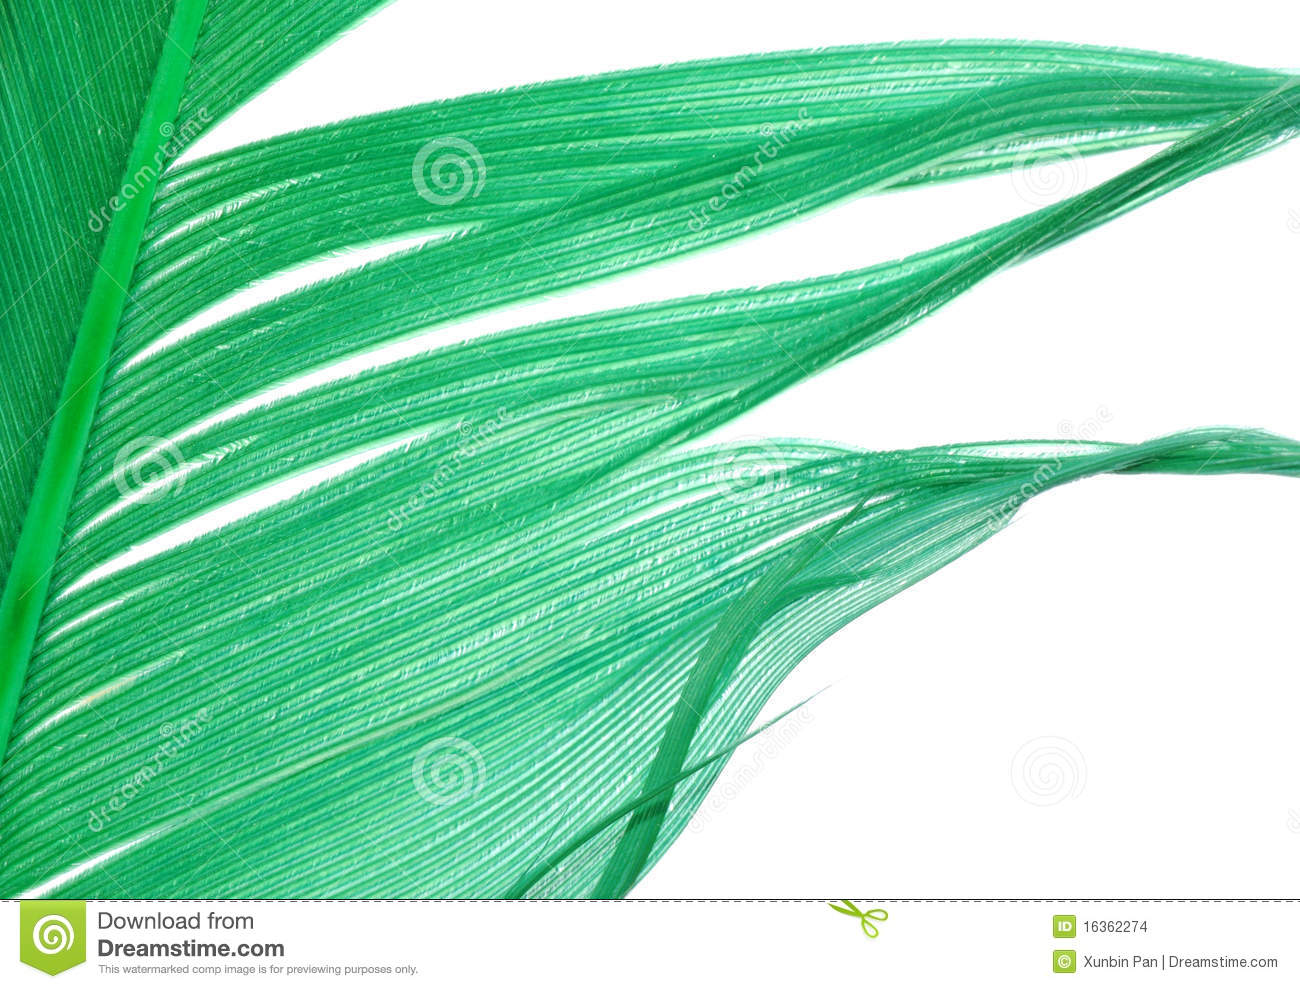 Green Feather Abstract Texture Stock Images   Image  16362274